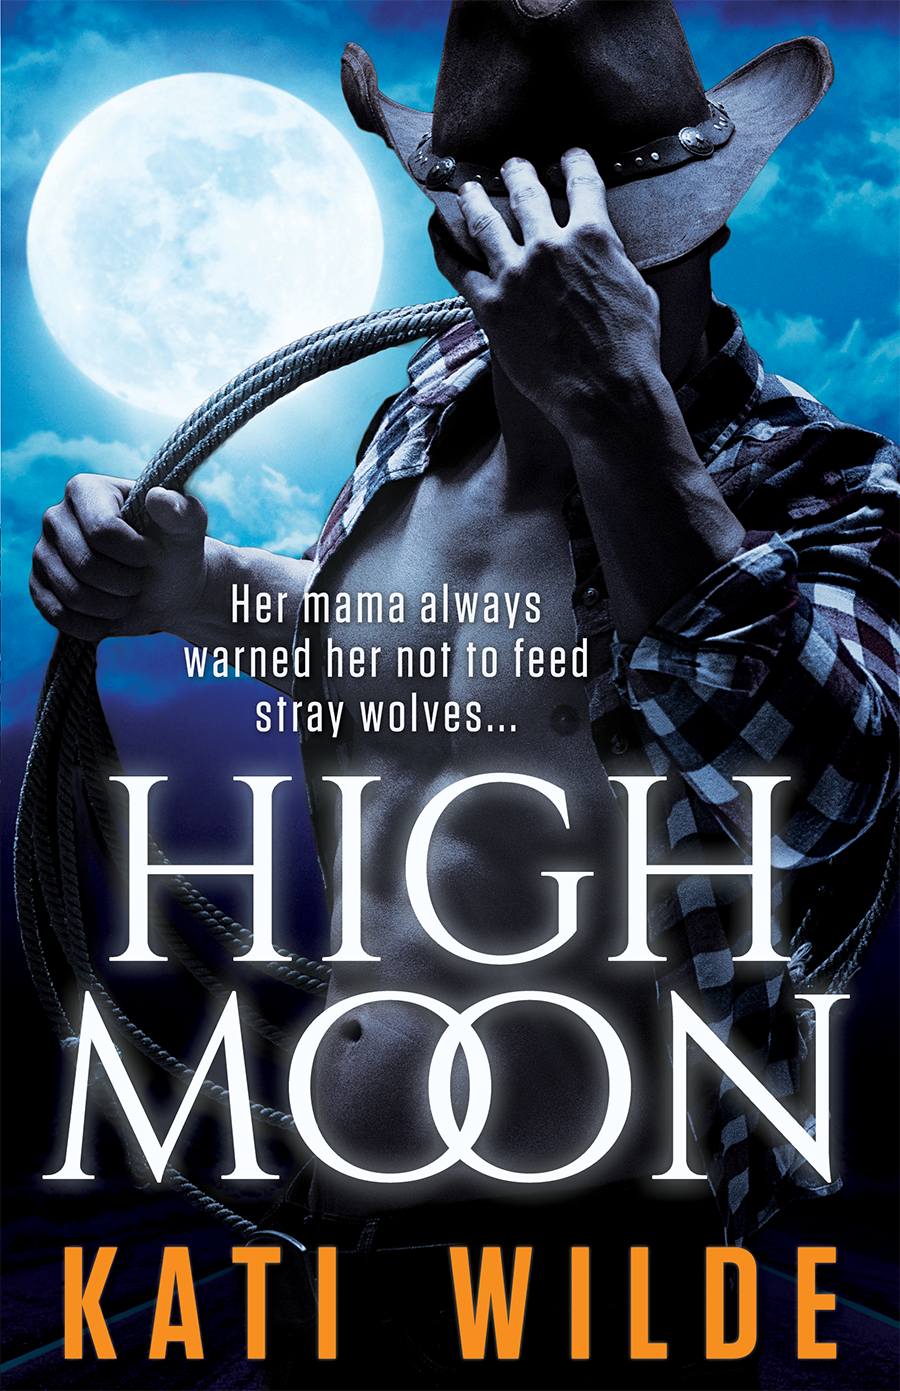 high moon cover showing a cowboy in front of a full moon